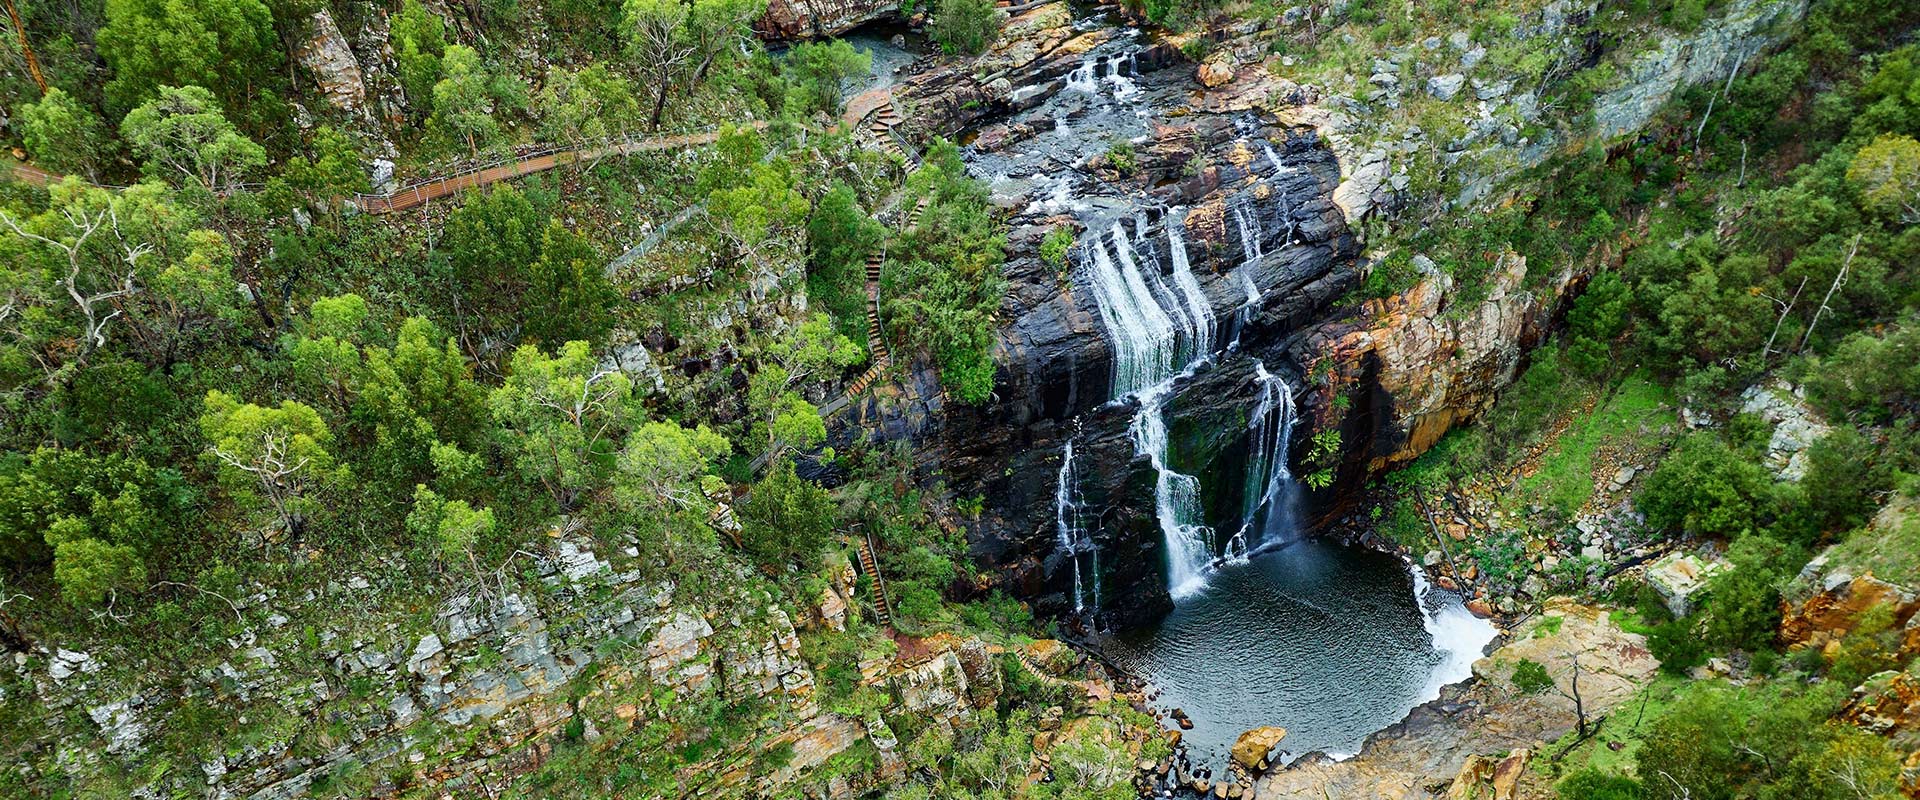 Aerial view overlooking a large water fall with green rugged bushland either side and viewing platforms.